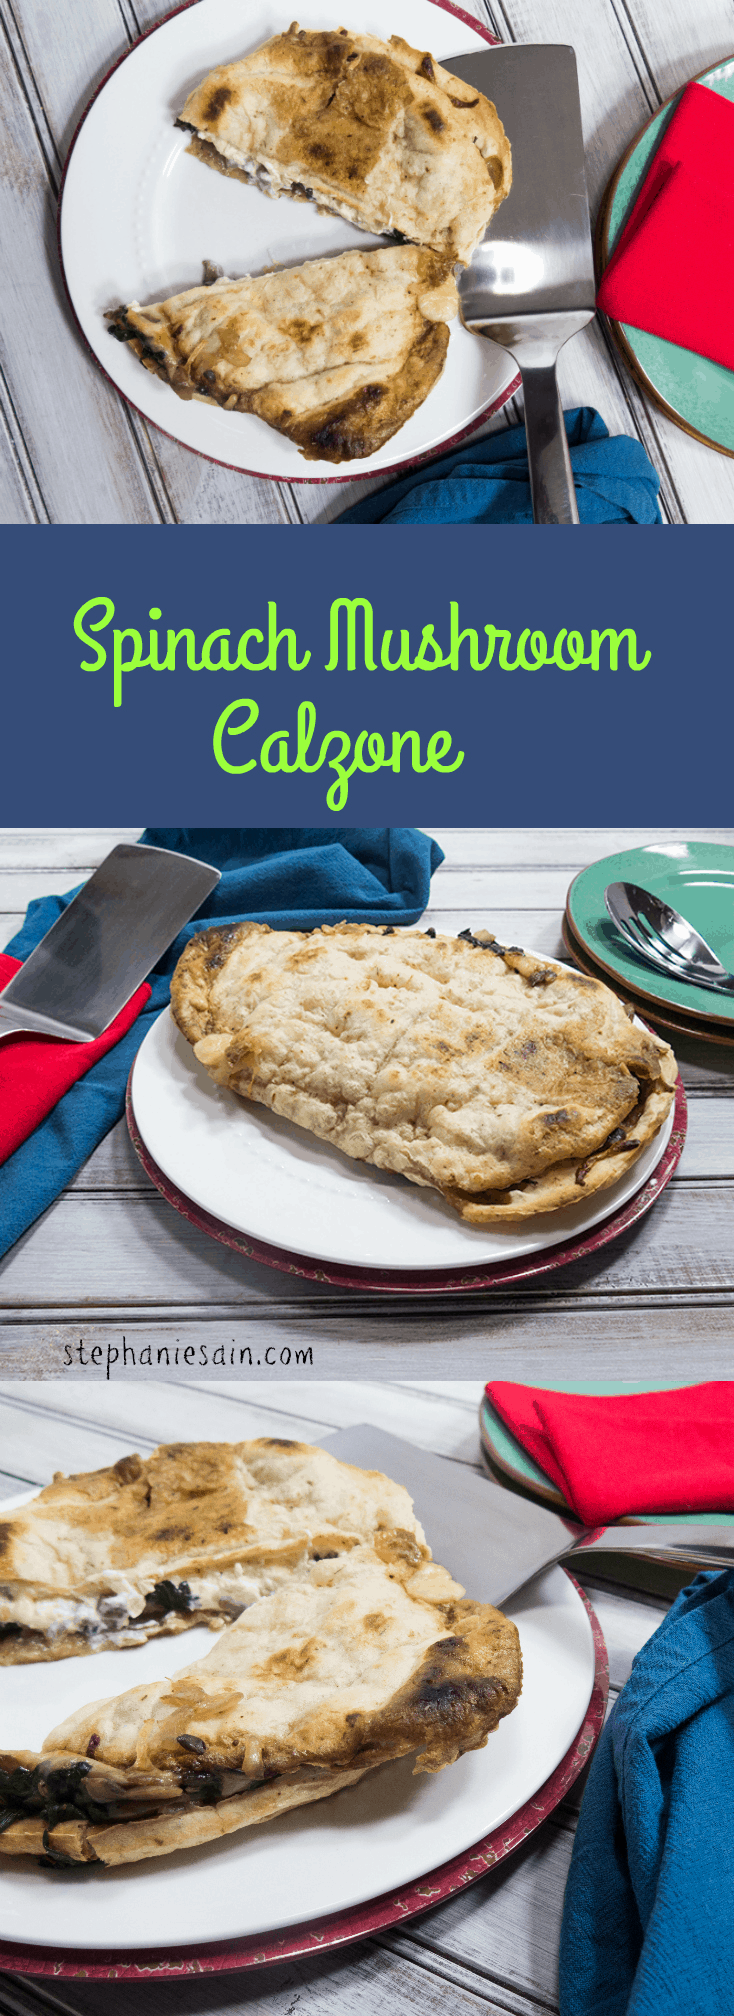 Spinach Mushroom Calzone is packed with mushrooms, spinach, and cheese in a tasty pocket that is both vegetarian and gluten free.